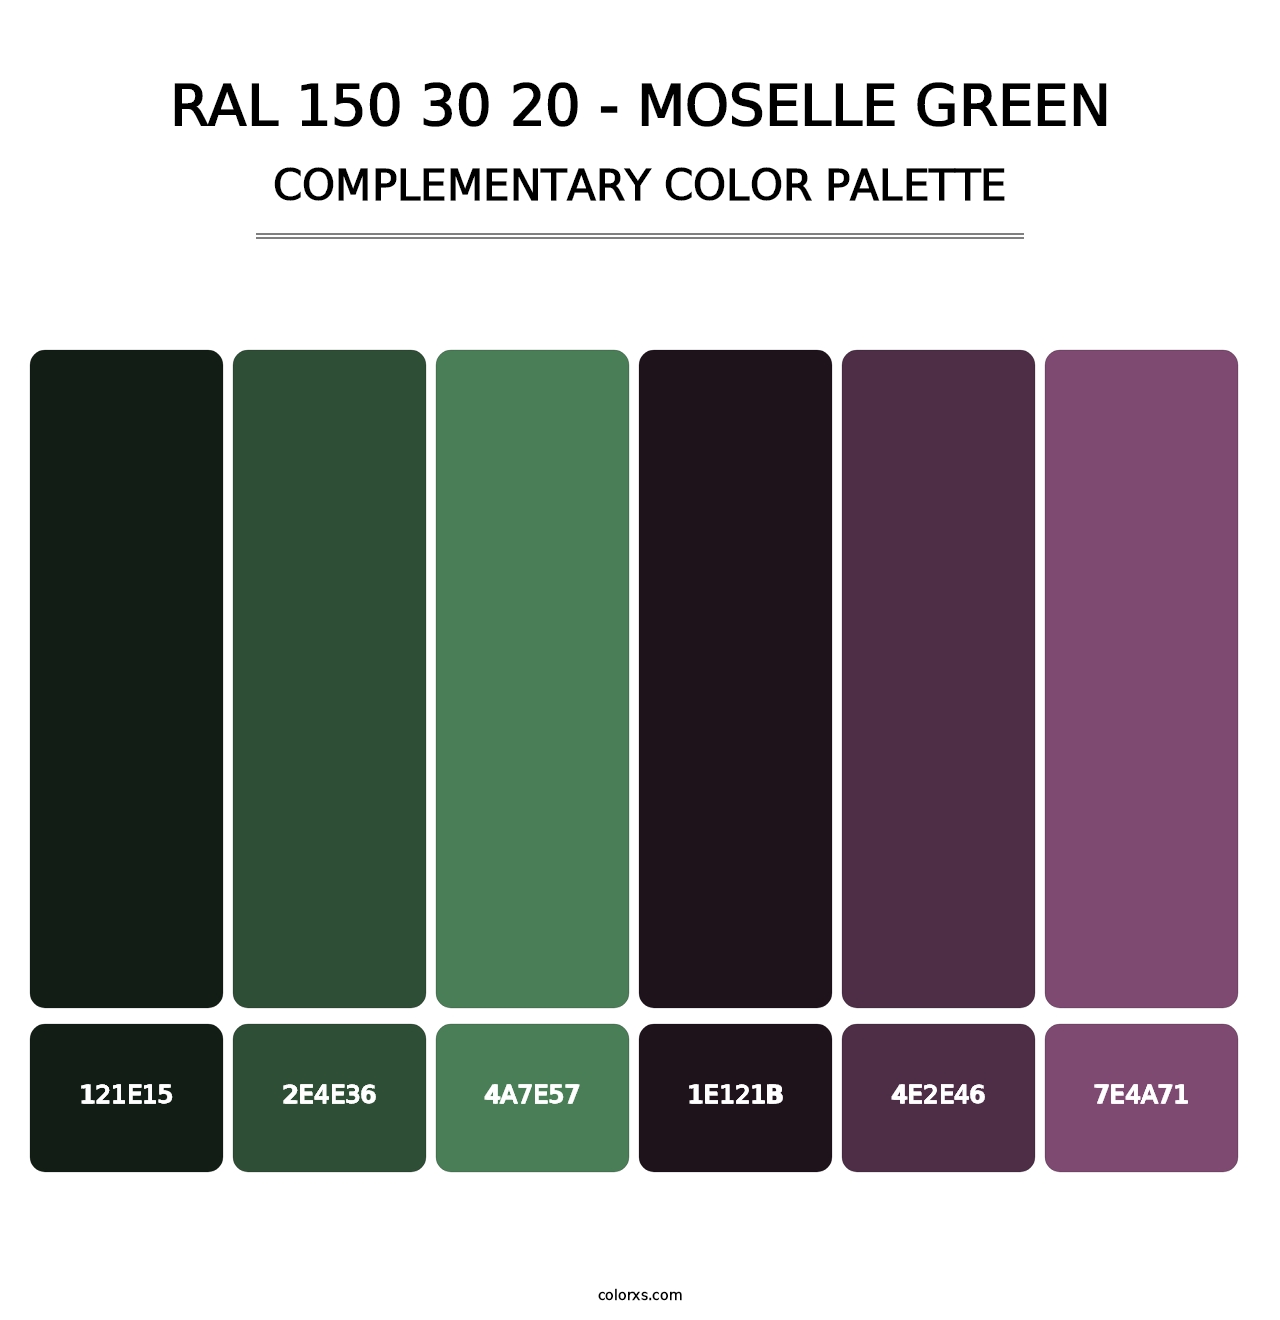 RAL 150 30 20 - Moselle Green - Complementary Color Palette